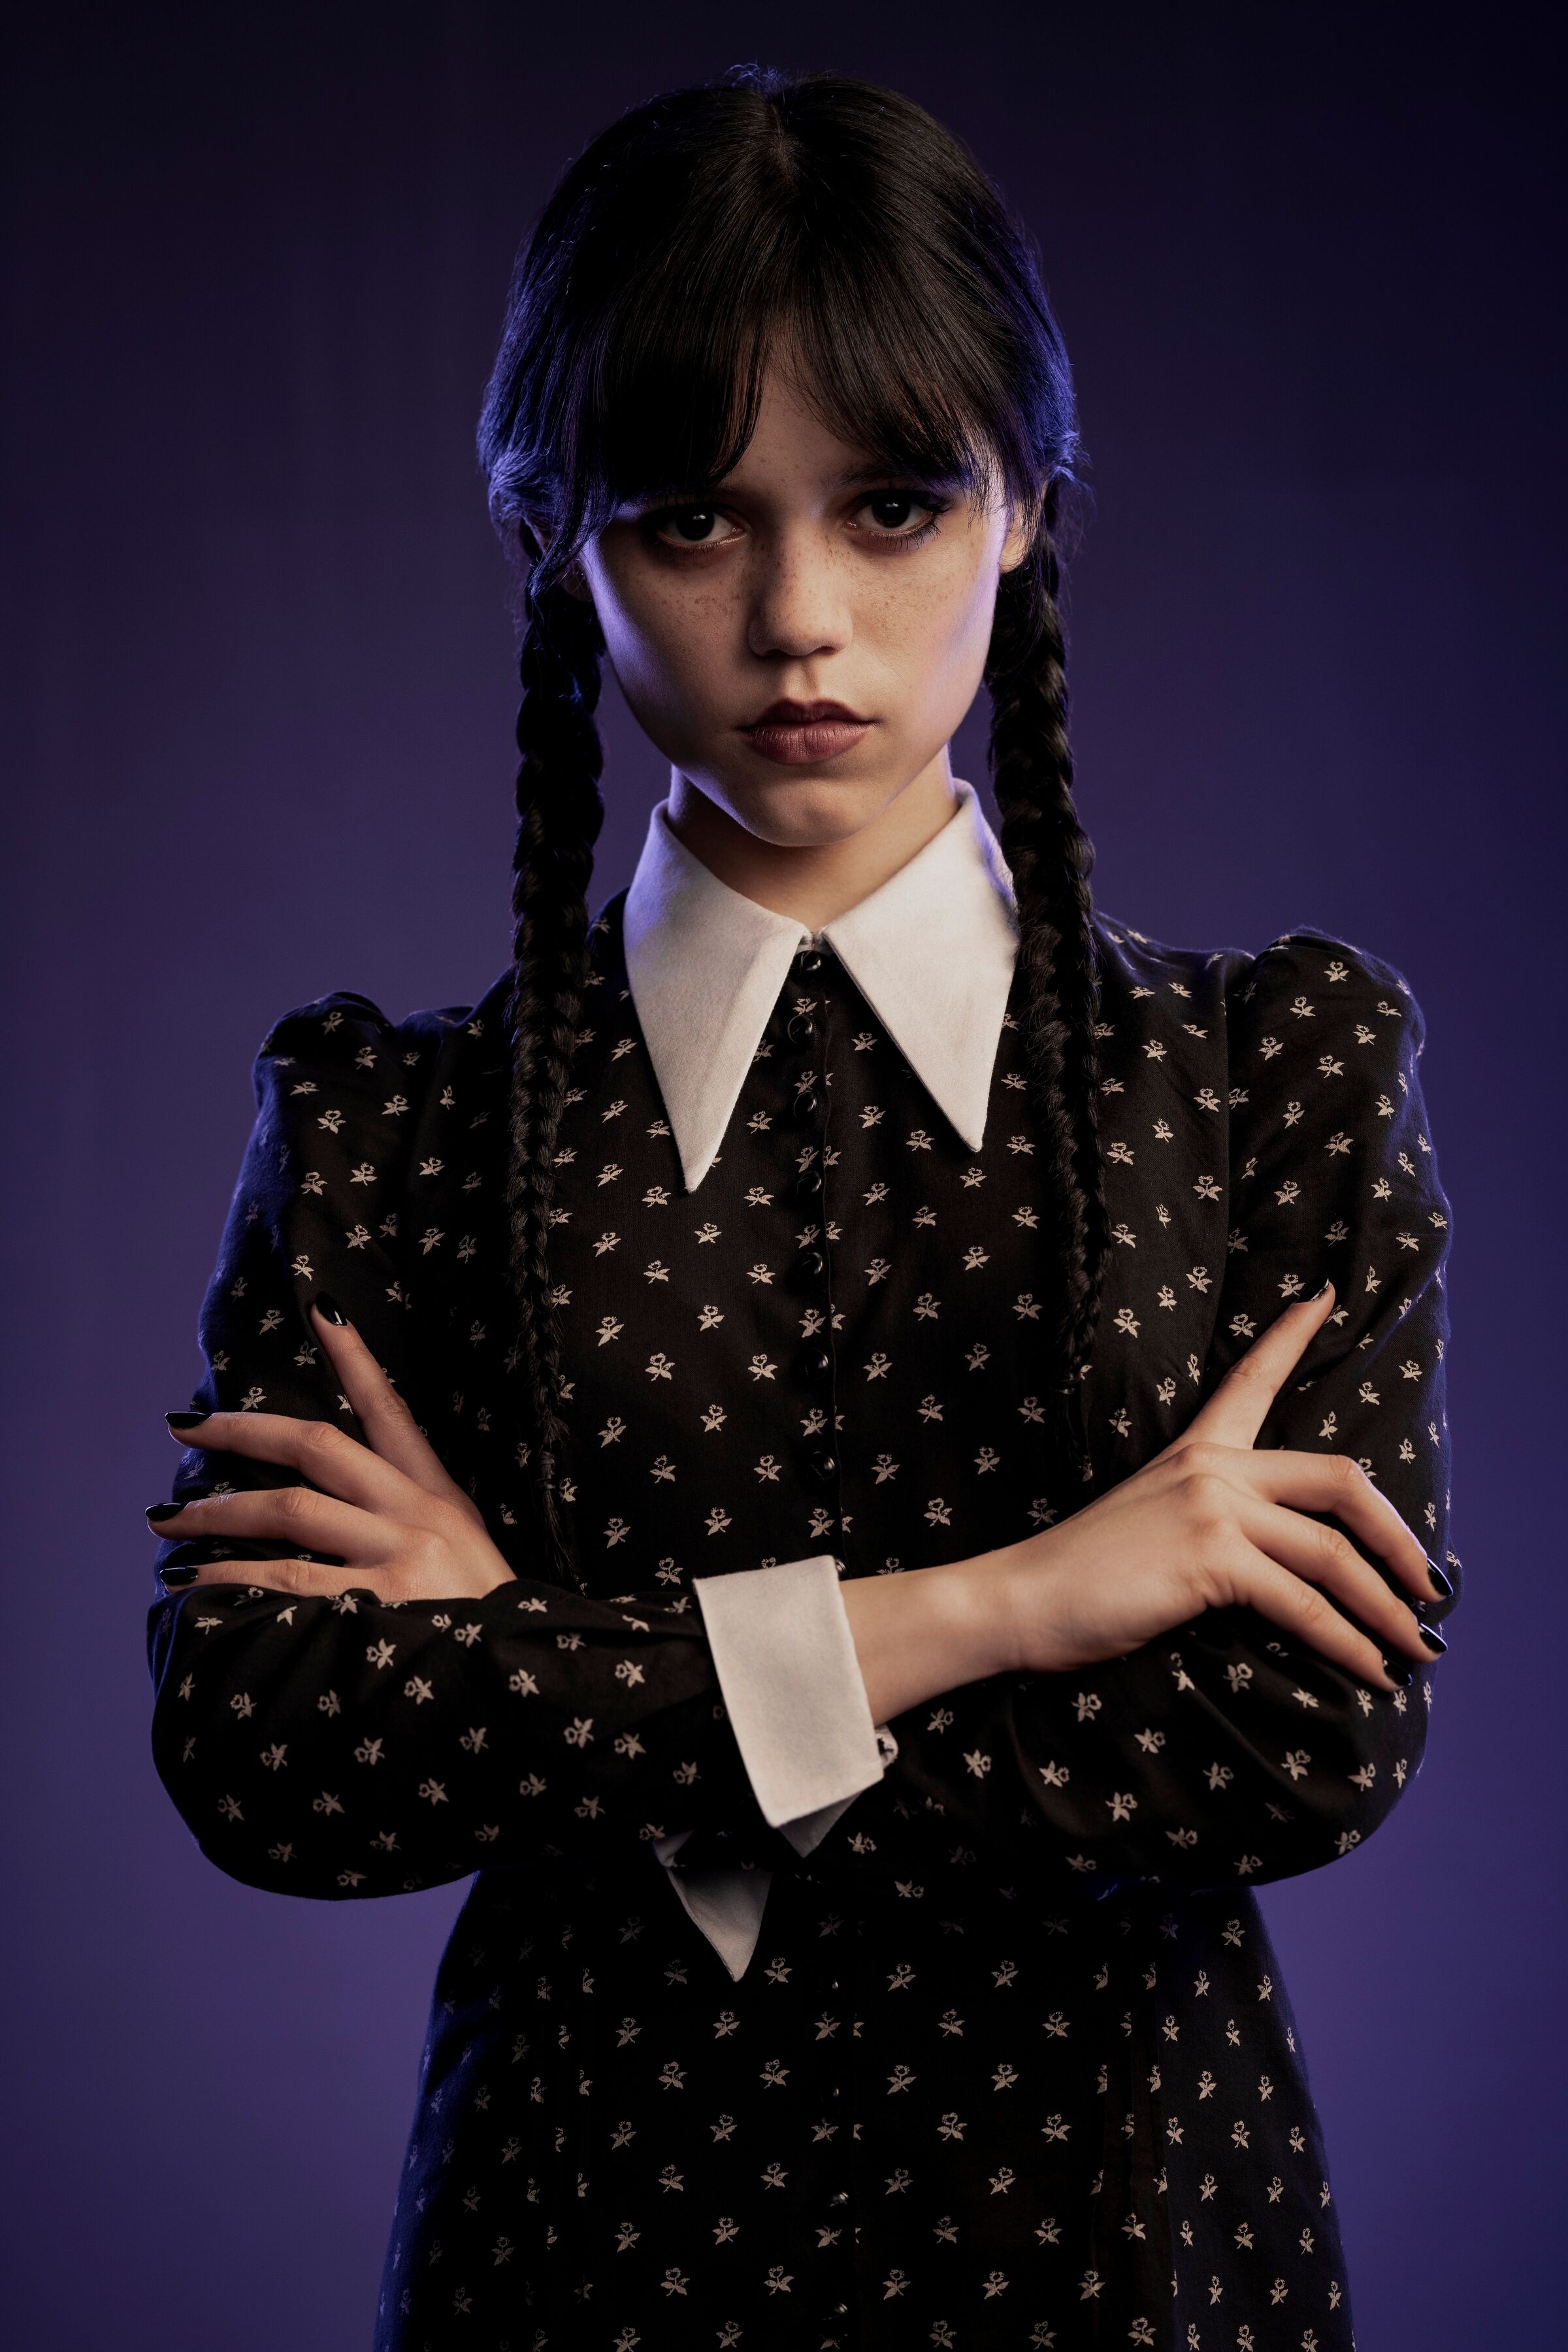 Wednesday addams hi-res stock photography and images - Alamy